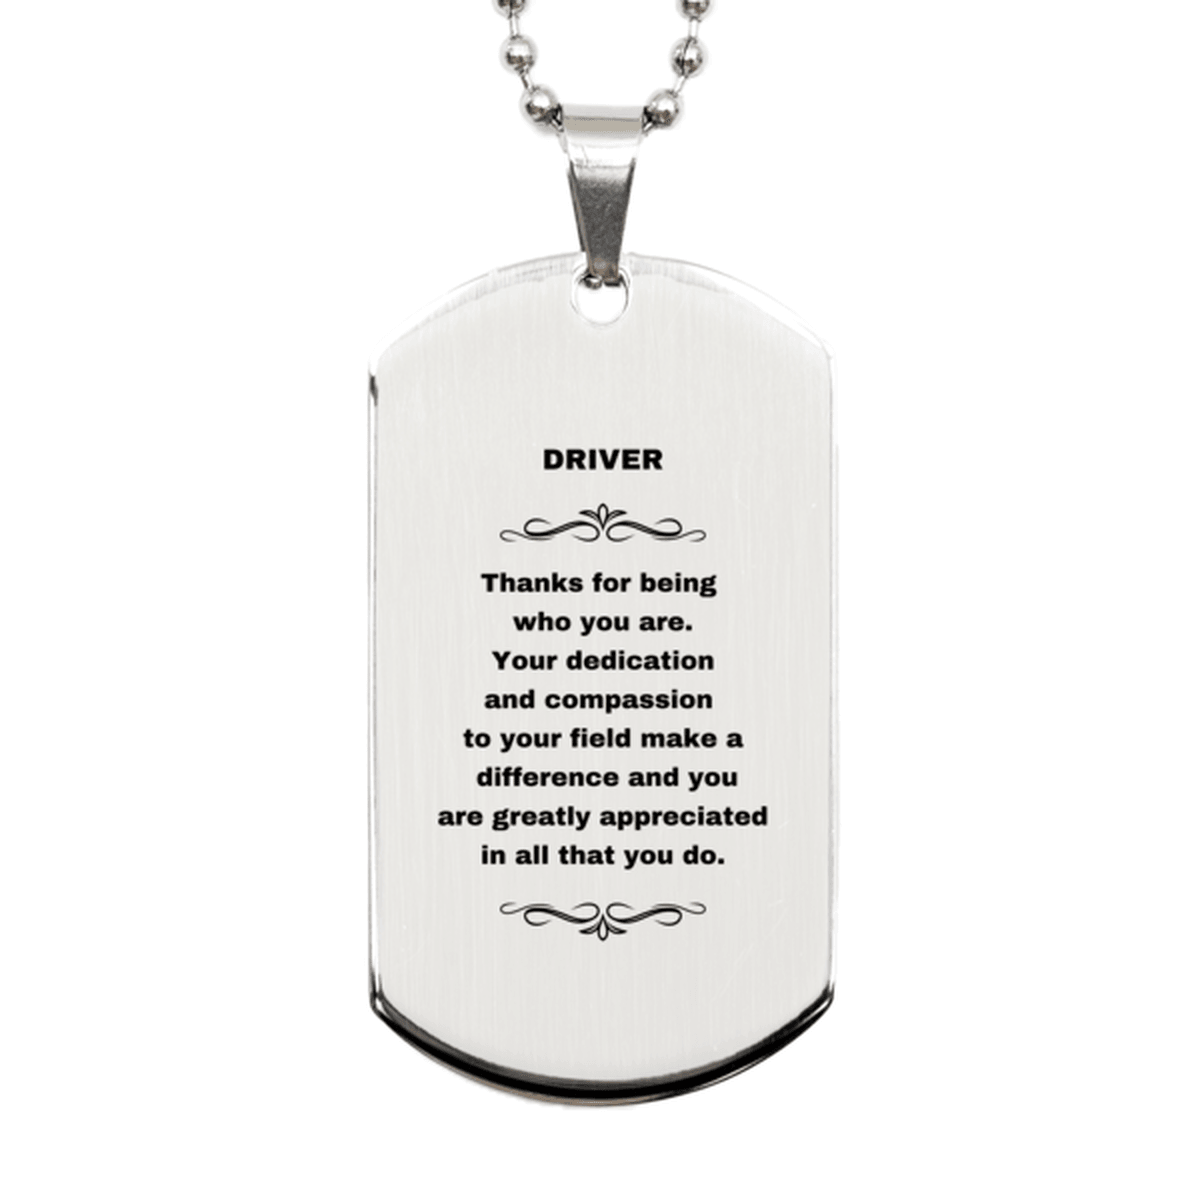 Driver Silver Dog Tag Necklace Engraved Bracelet - Thanks for being who you are - Birthday Christmas Jewelry Gifts Coworkers Colleague Boss - Mallard Moon Gift Shop